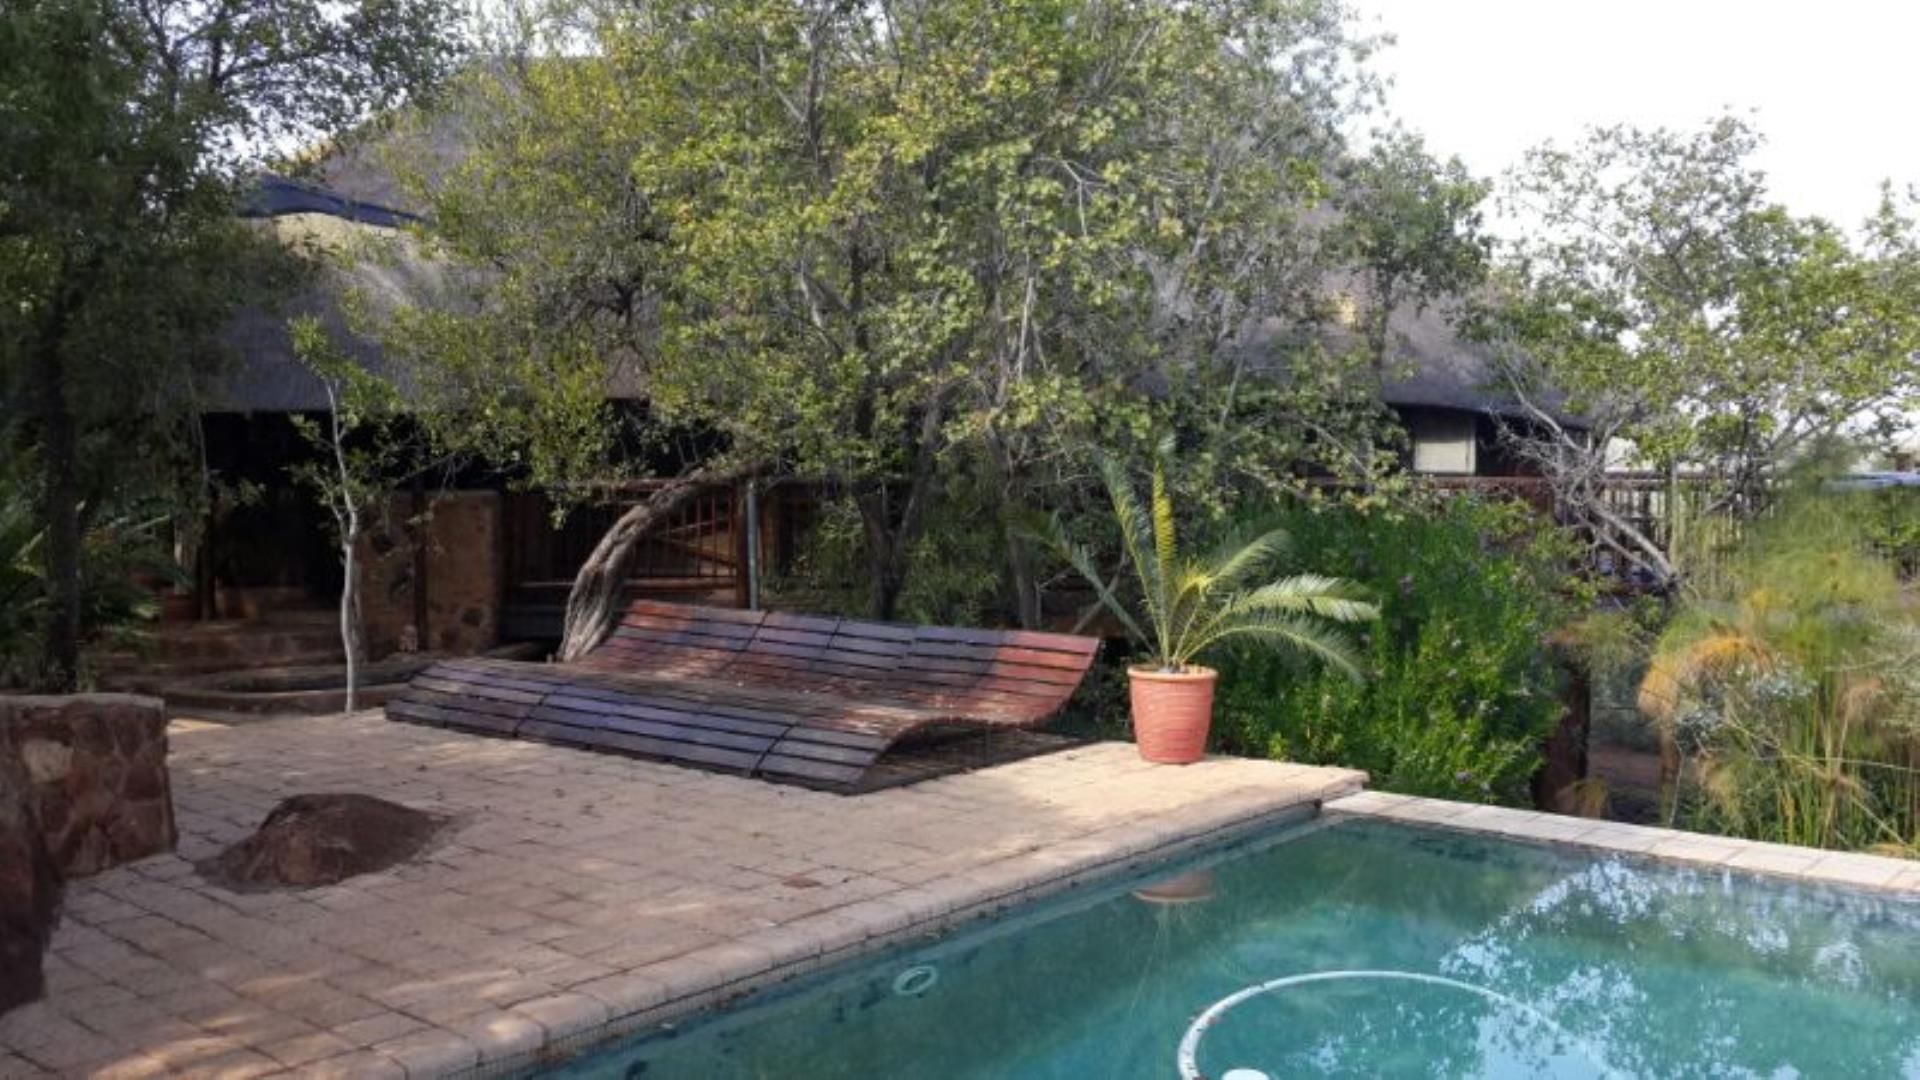 7 Bedroom Game Farm or Lodge for Sale - Limpopo